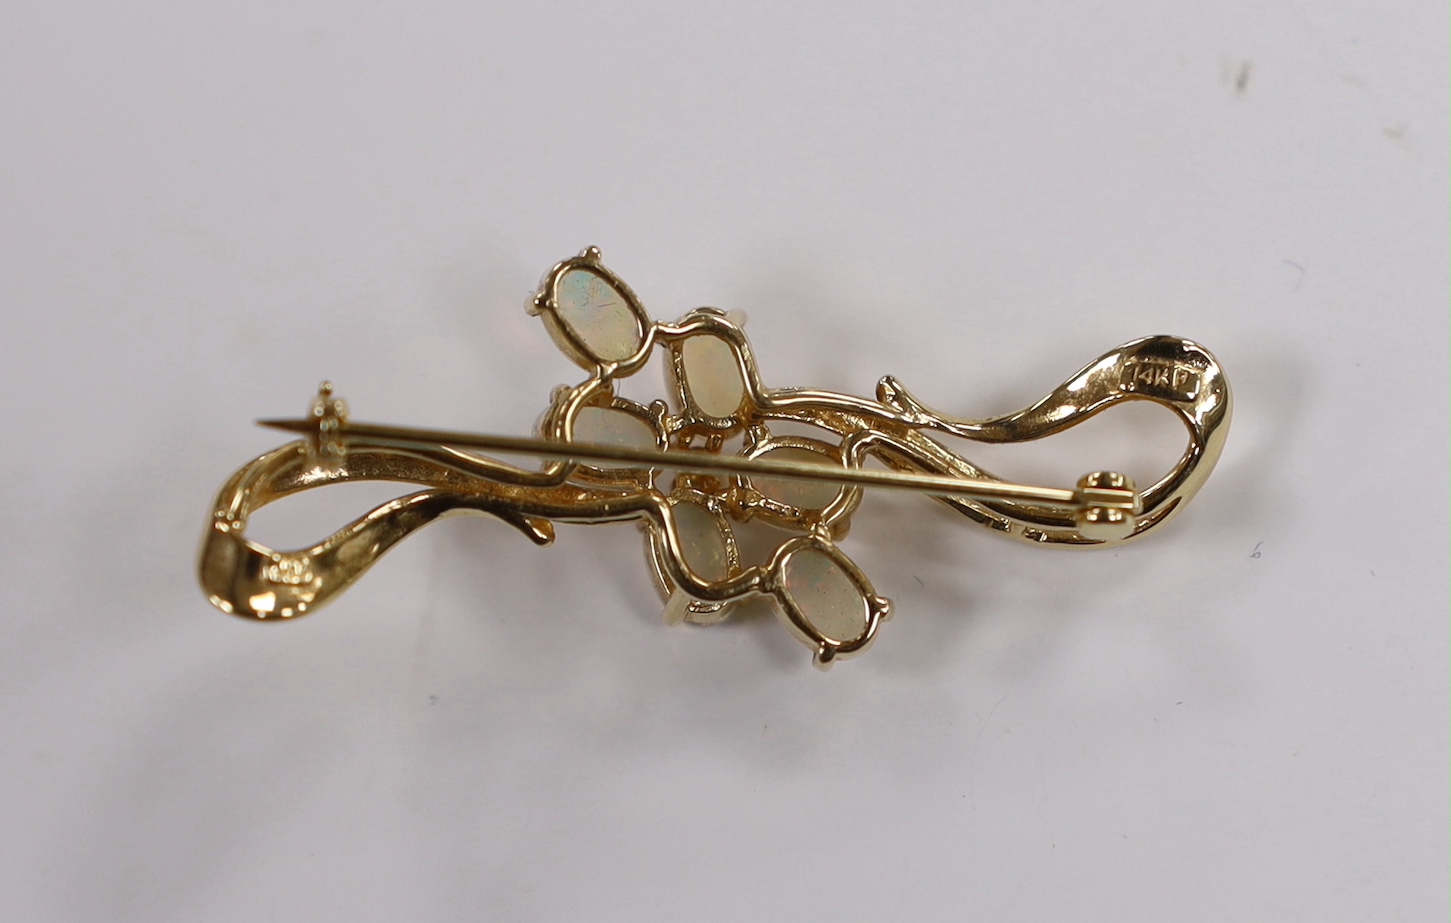 A 14k and six stone white opal cluster set brooch, 45mm, gross weight 5 grams.